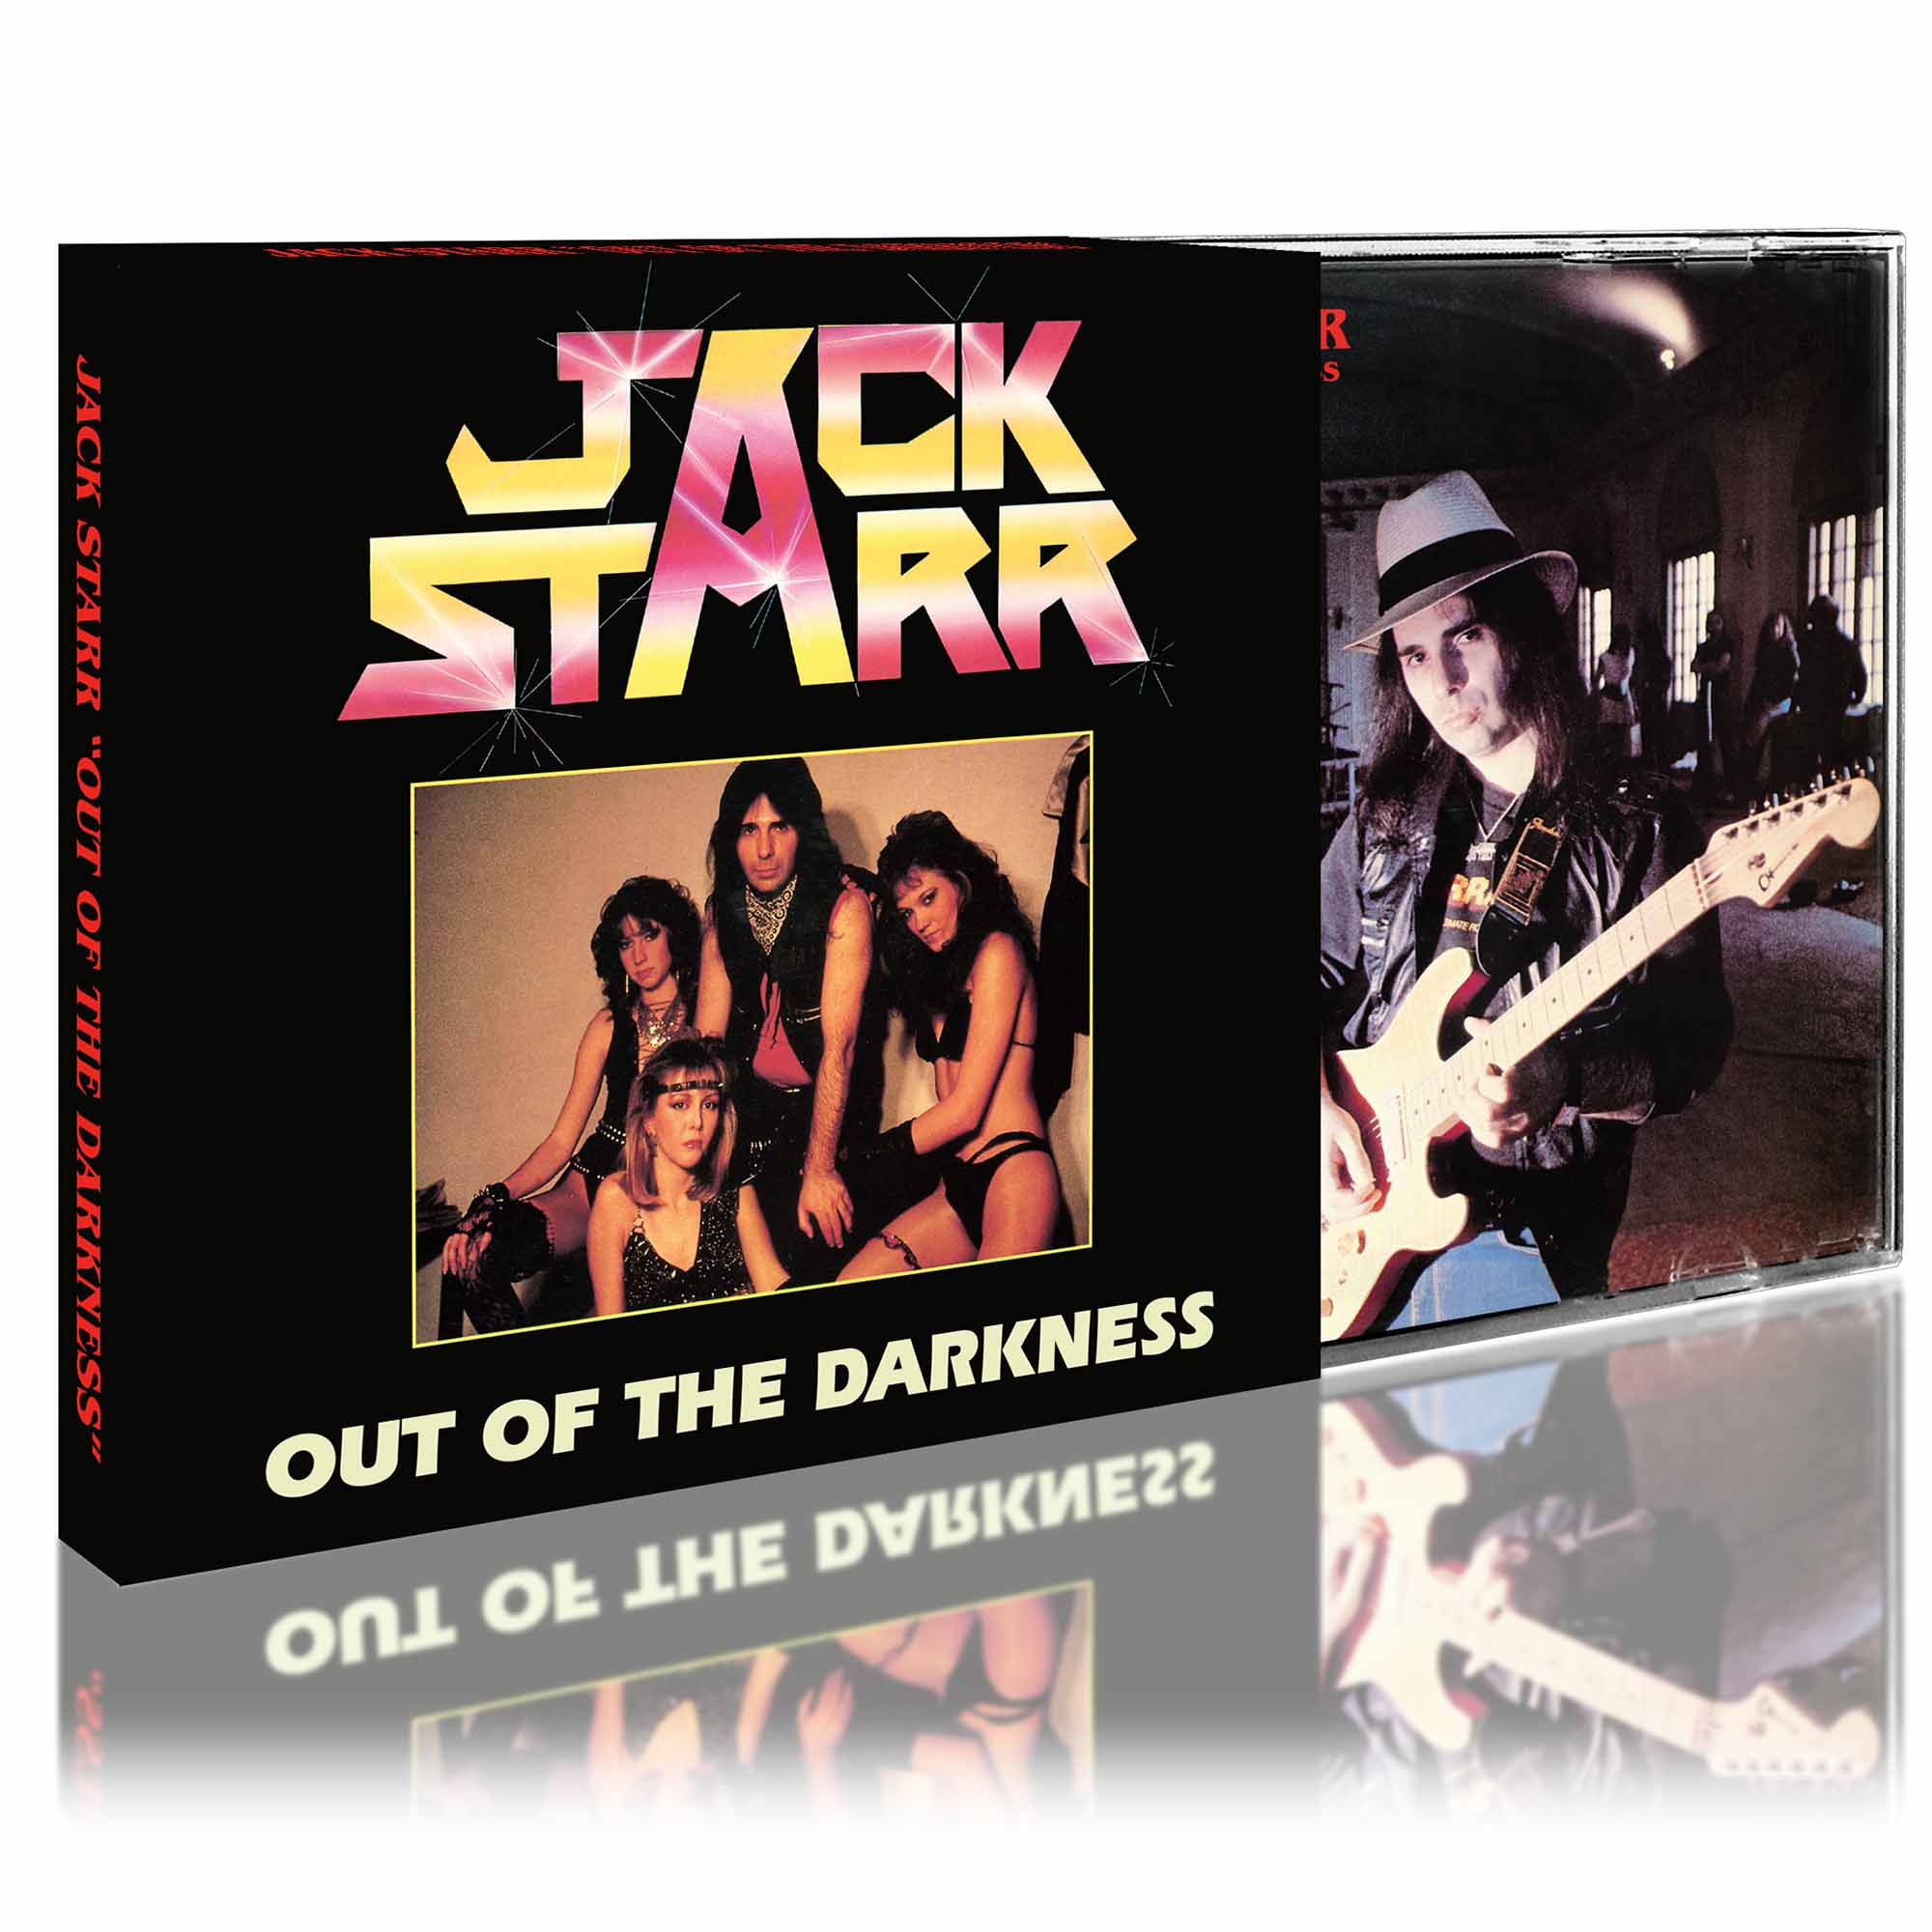 JACK STARR - Out of the Darkness  CD